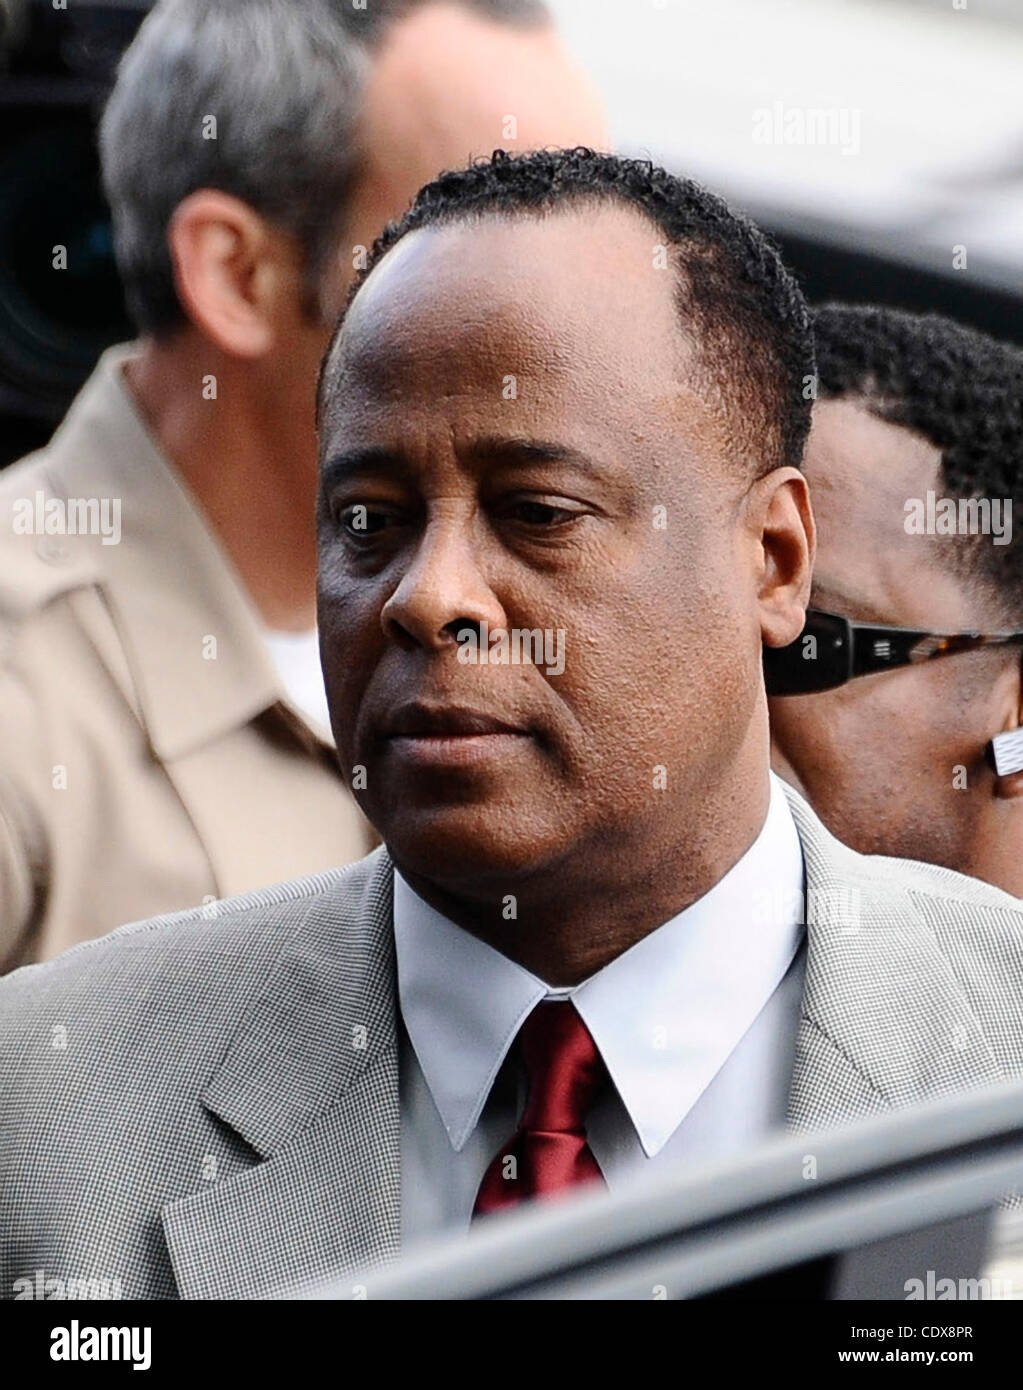 Nov. 07, 2011 - Los Angeles, California, USA - FILE - Michael Jackson's personal physician CONRAD MURRAY has been found guilty of involuntary manslaughter for causing the pop icon's 2009 death by a powerful surgical anesthetic. Pictured: Feb 08, 2010 - Los Angeles, California, USA - Dr. Conrad Murra Stock Photo